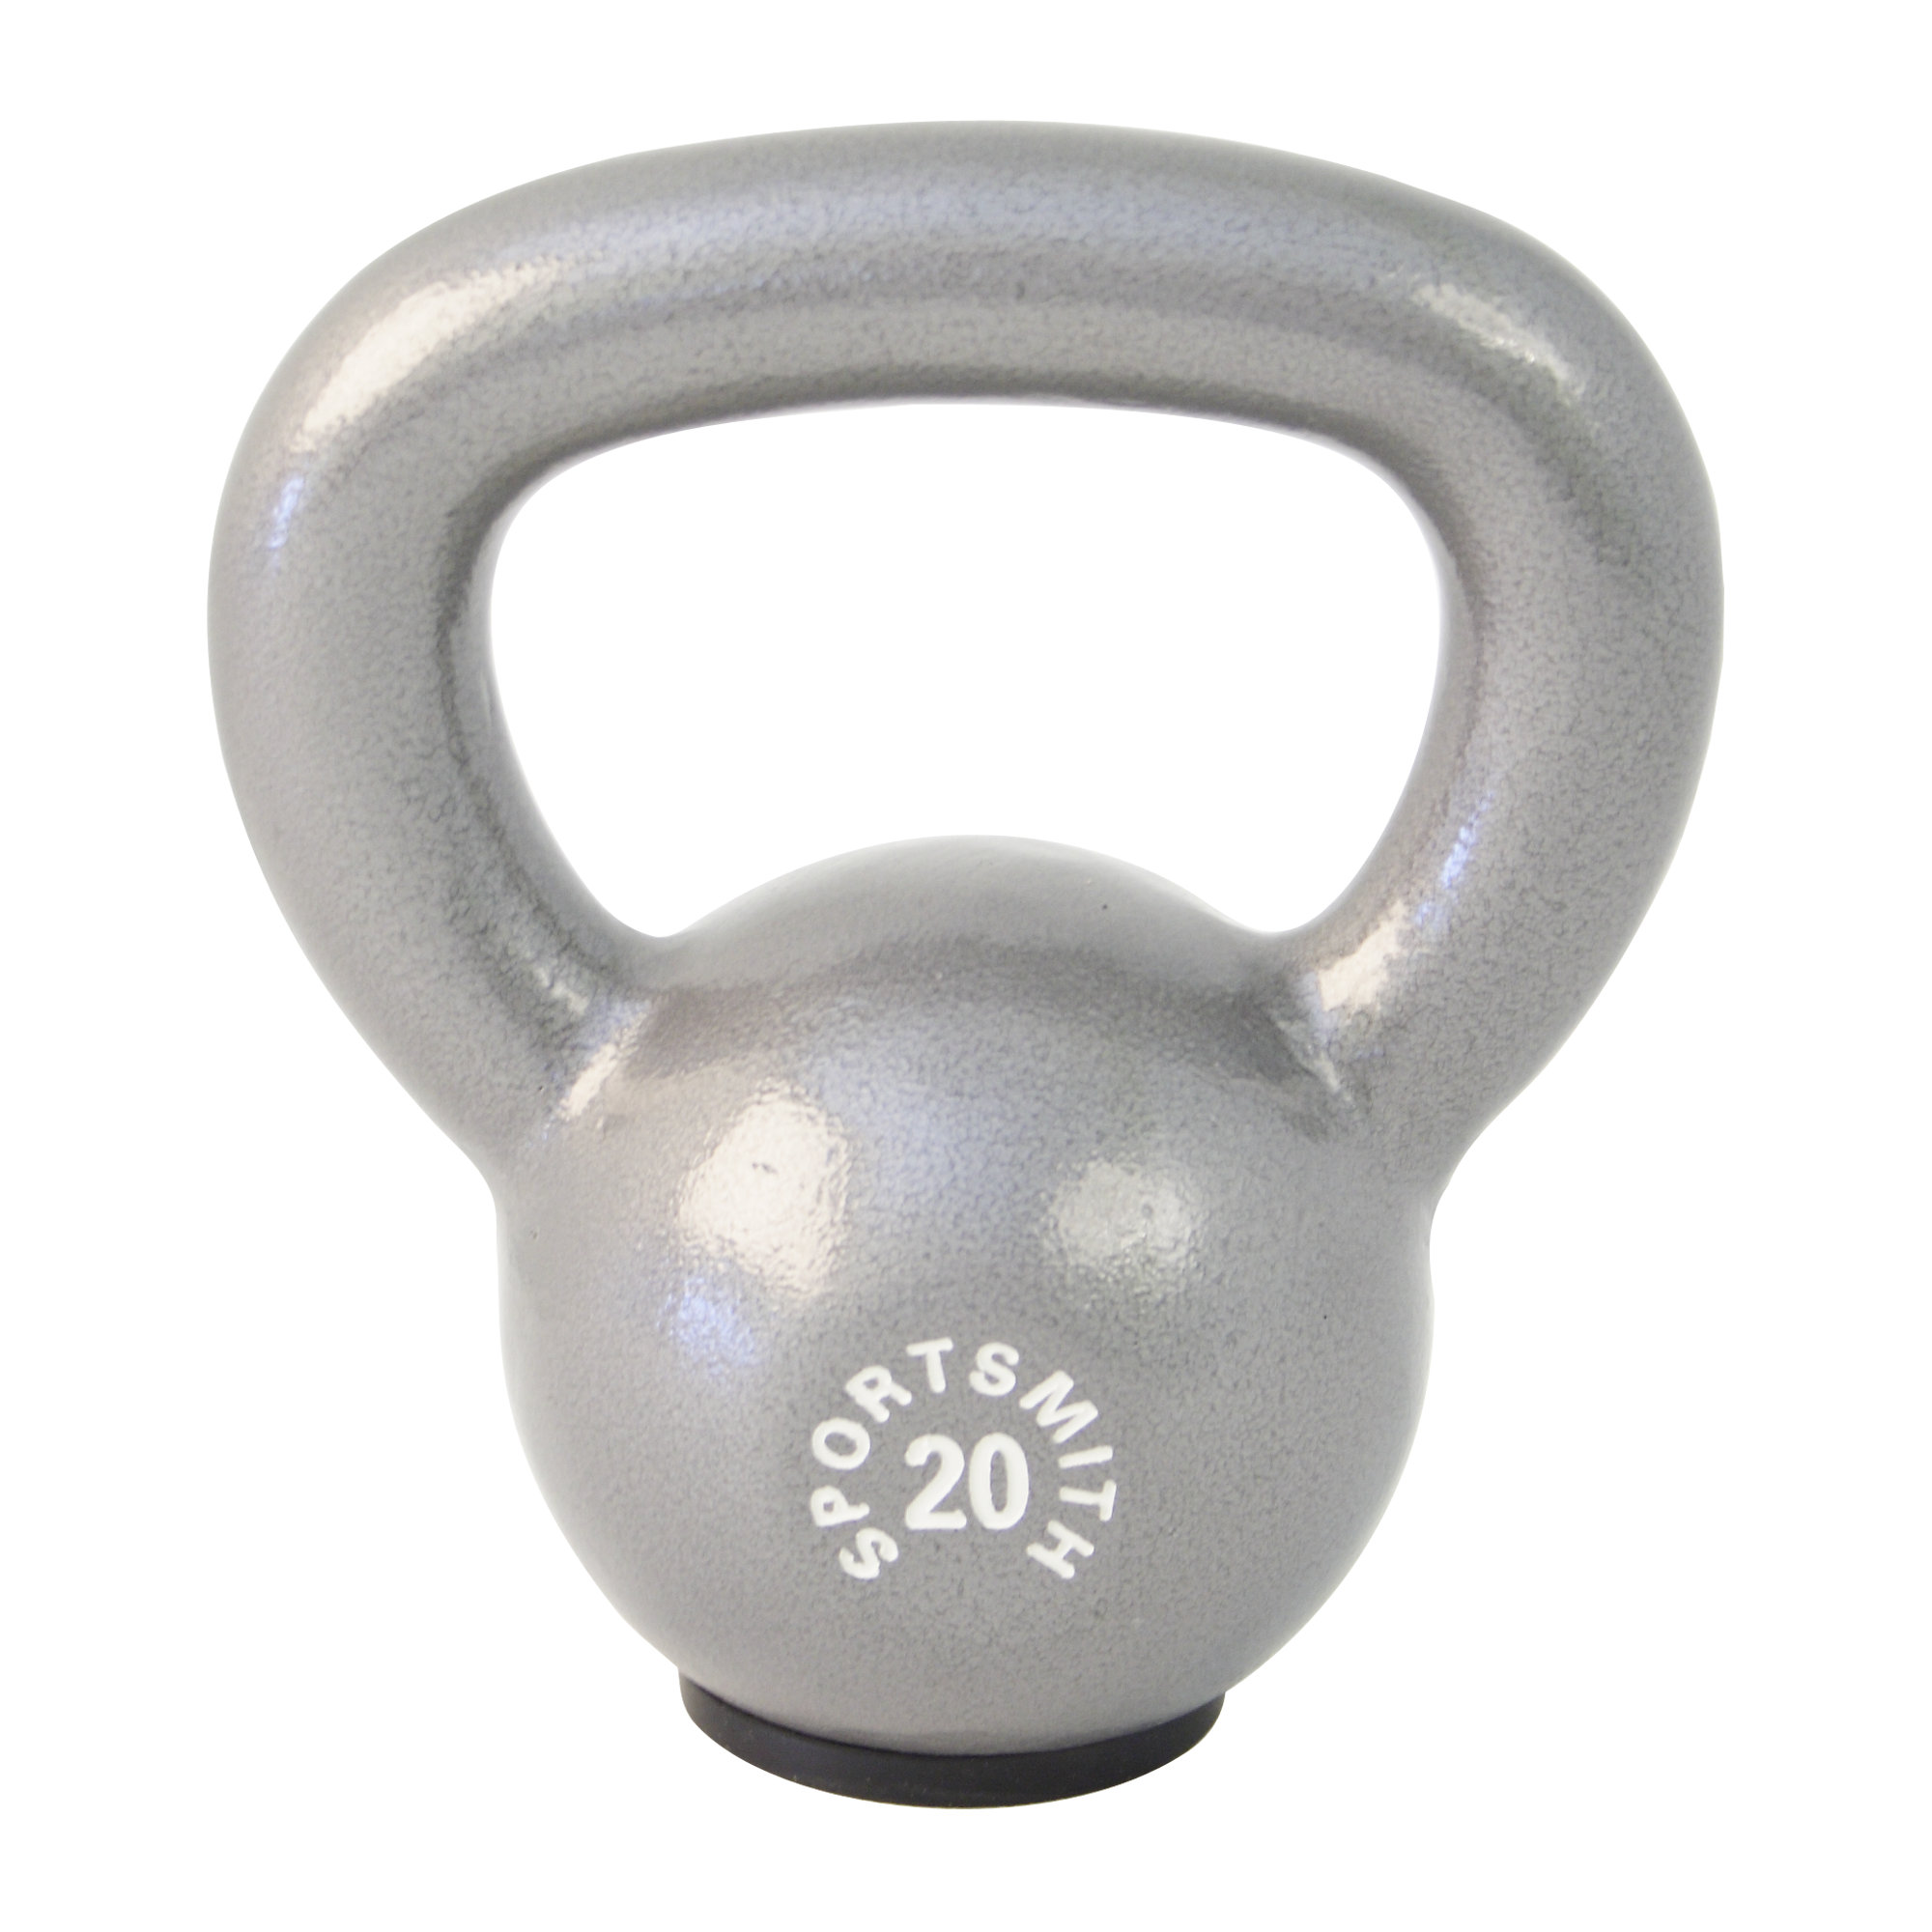 20 Lb. Kettlebell with Rubber Base, Cast Iron, Gray